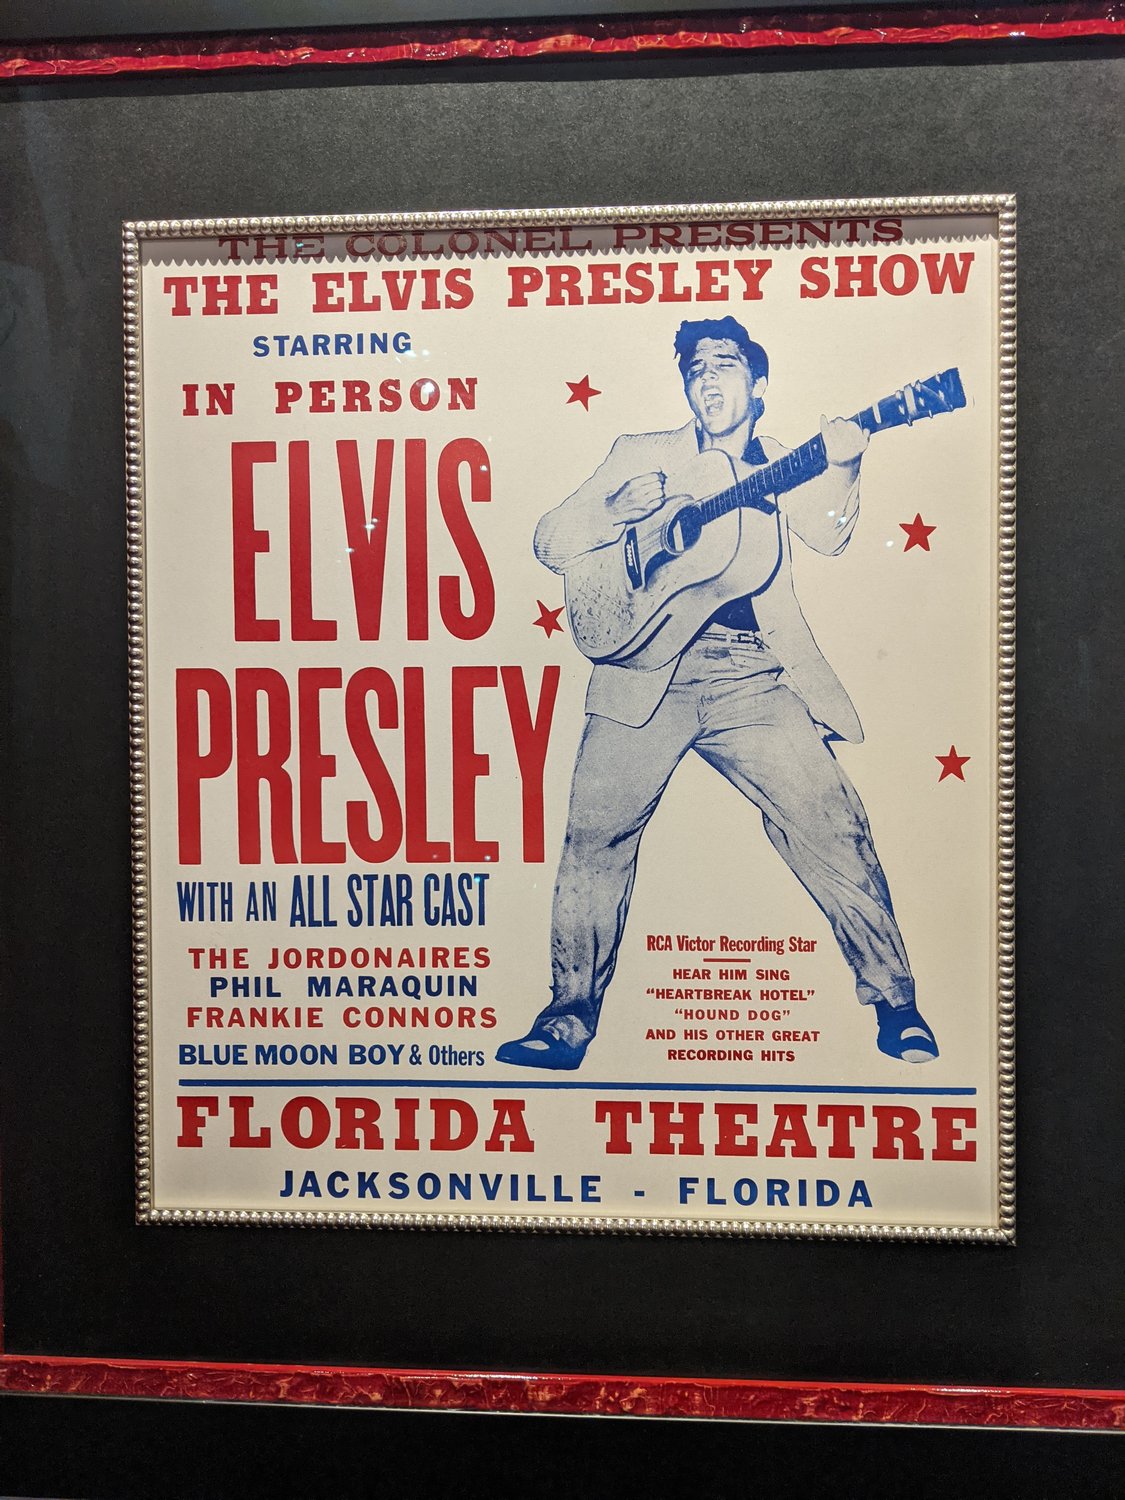 A poster from Elvis's appearance at the Florida Theatre.